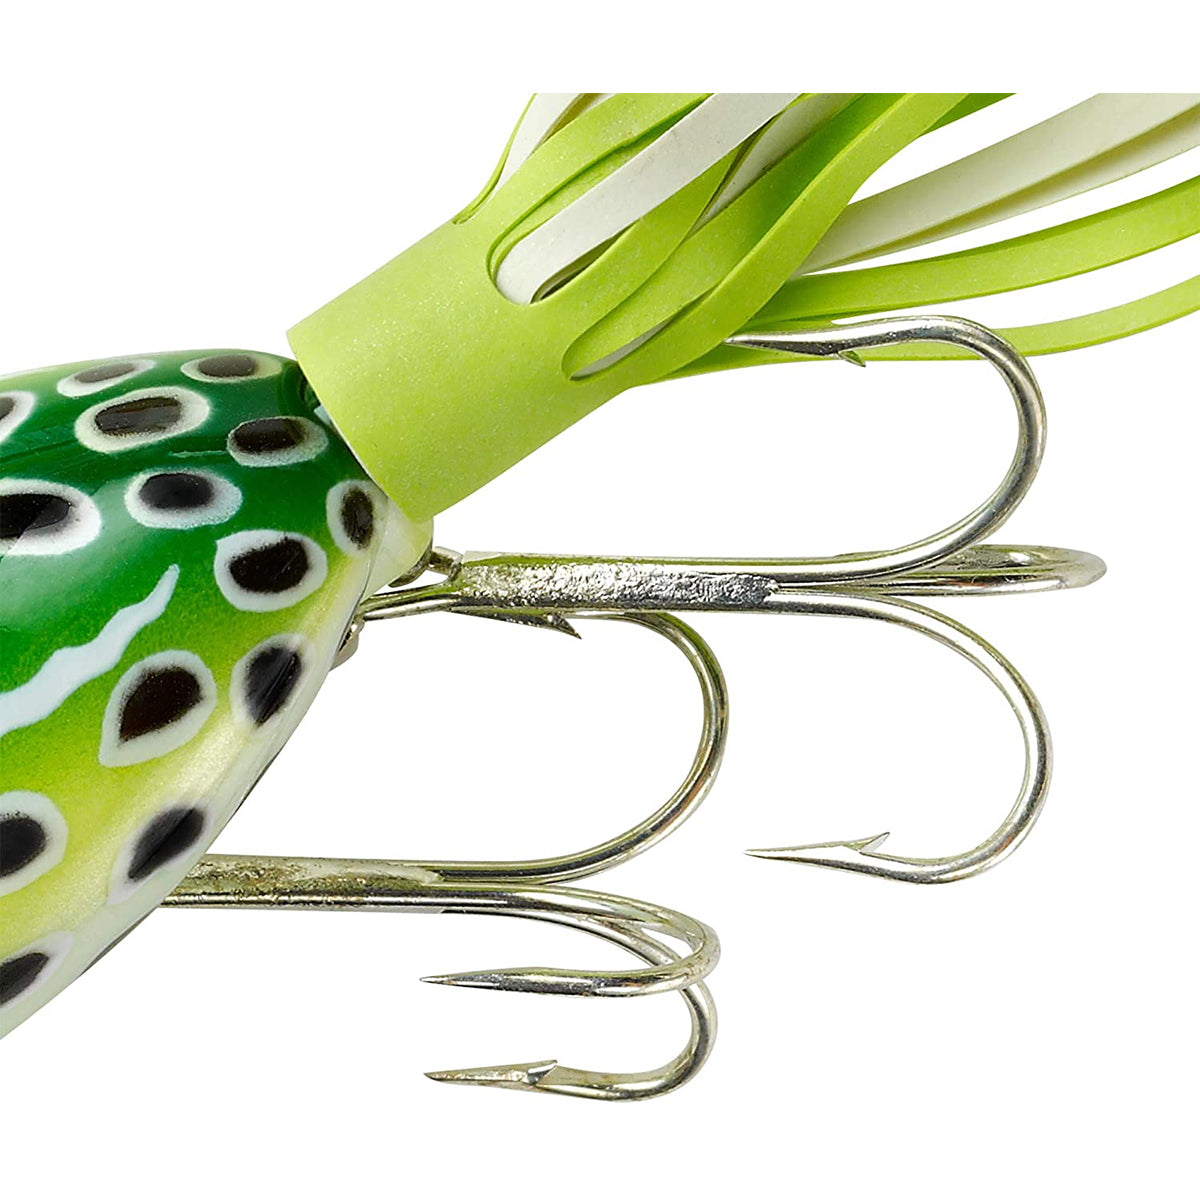 Arbogast Triple Threat Varying Weights Fishing Lures Arbogast